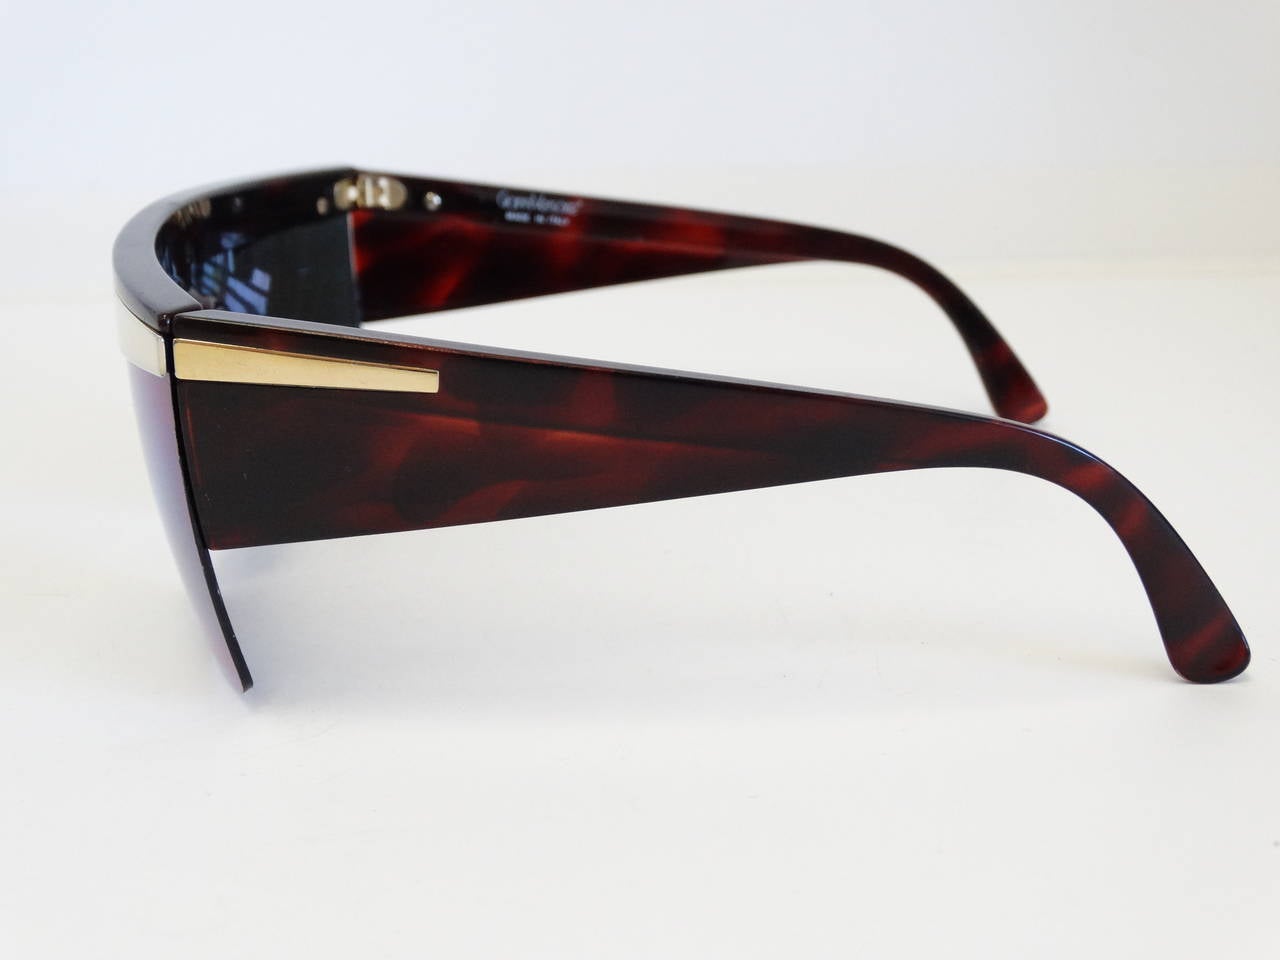 Ultra 80's Gianni Versace Update mirrored sunnies with a fabulous blu tint. Amber brown frames with a gold accent on the front. (small scratch on the front but goes unnoticed) 

LENGTH:	5.31 in. (14 cm)
WIDTH:	5.91 in. (15 cm)